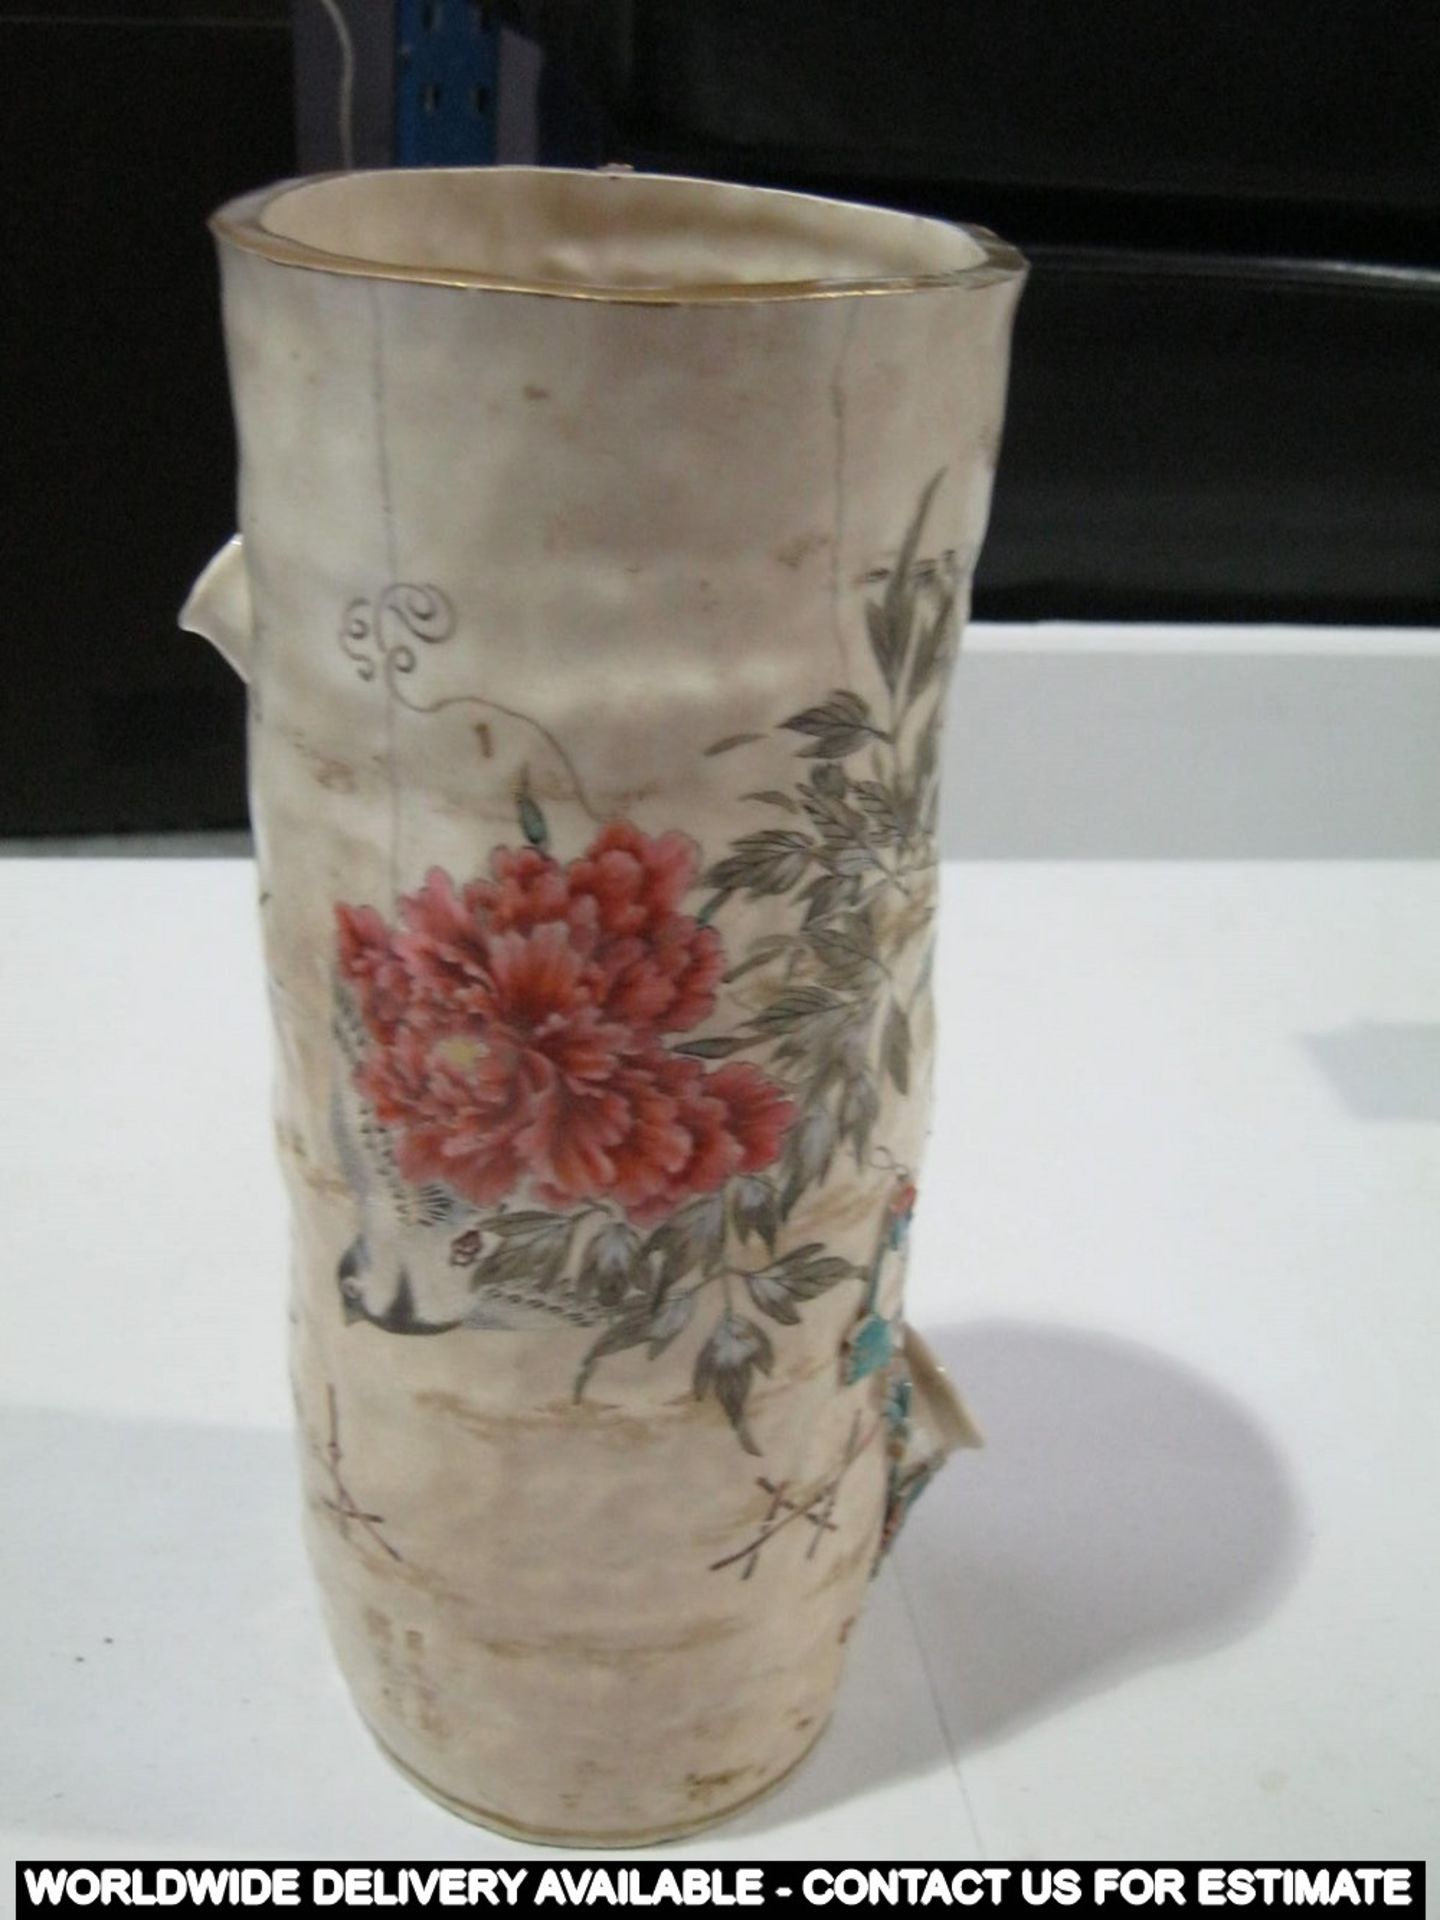 Ceramic cylindrical vase with relief decoration, hand painted flowers and bark stubs